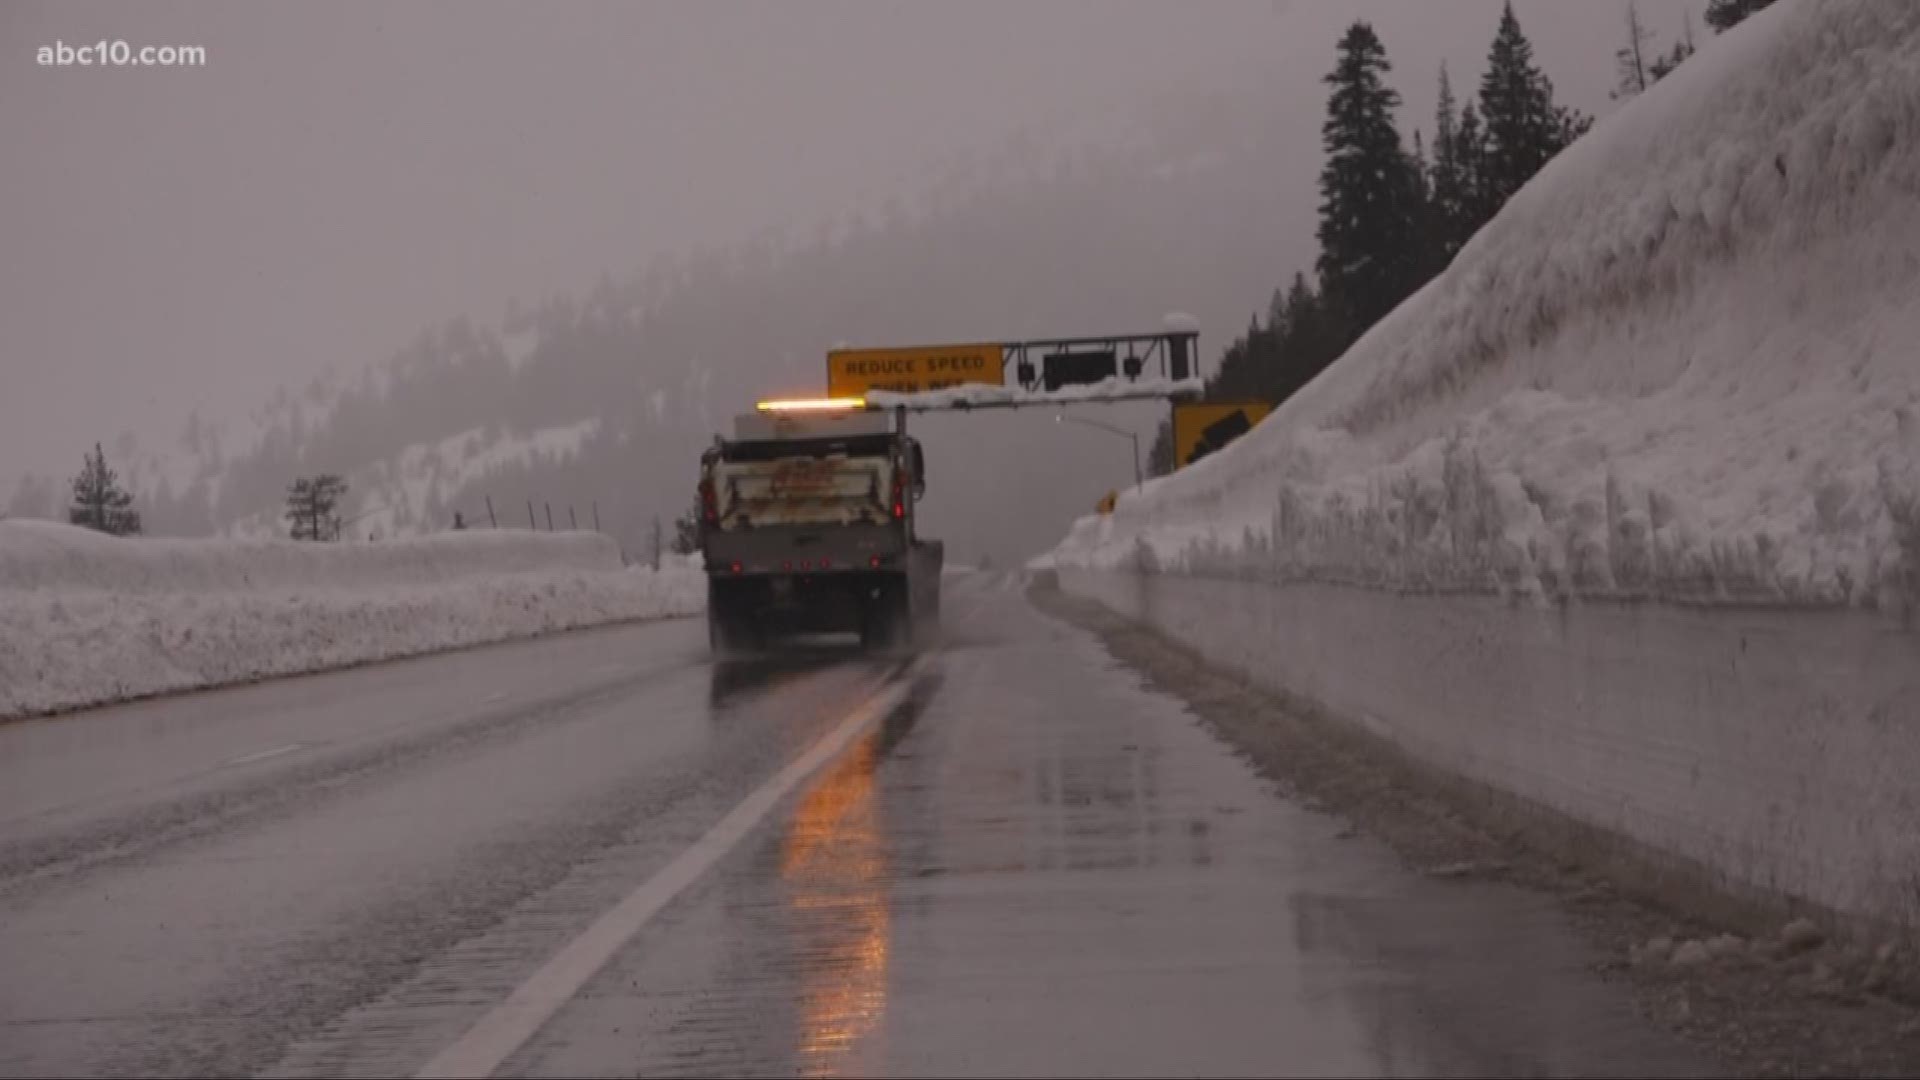 It has been a very difficult month for Caltrans trying to keep the roads open. The snow continues to fall and because of it Interstate 80 has been shut down from Colfax all the way to the Nevada state line. Here's how crews have been dealing with it.